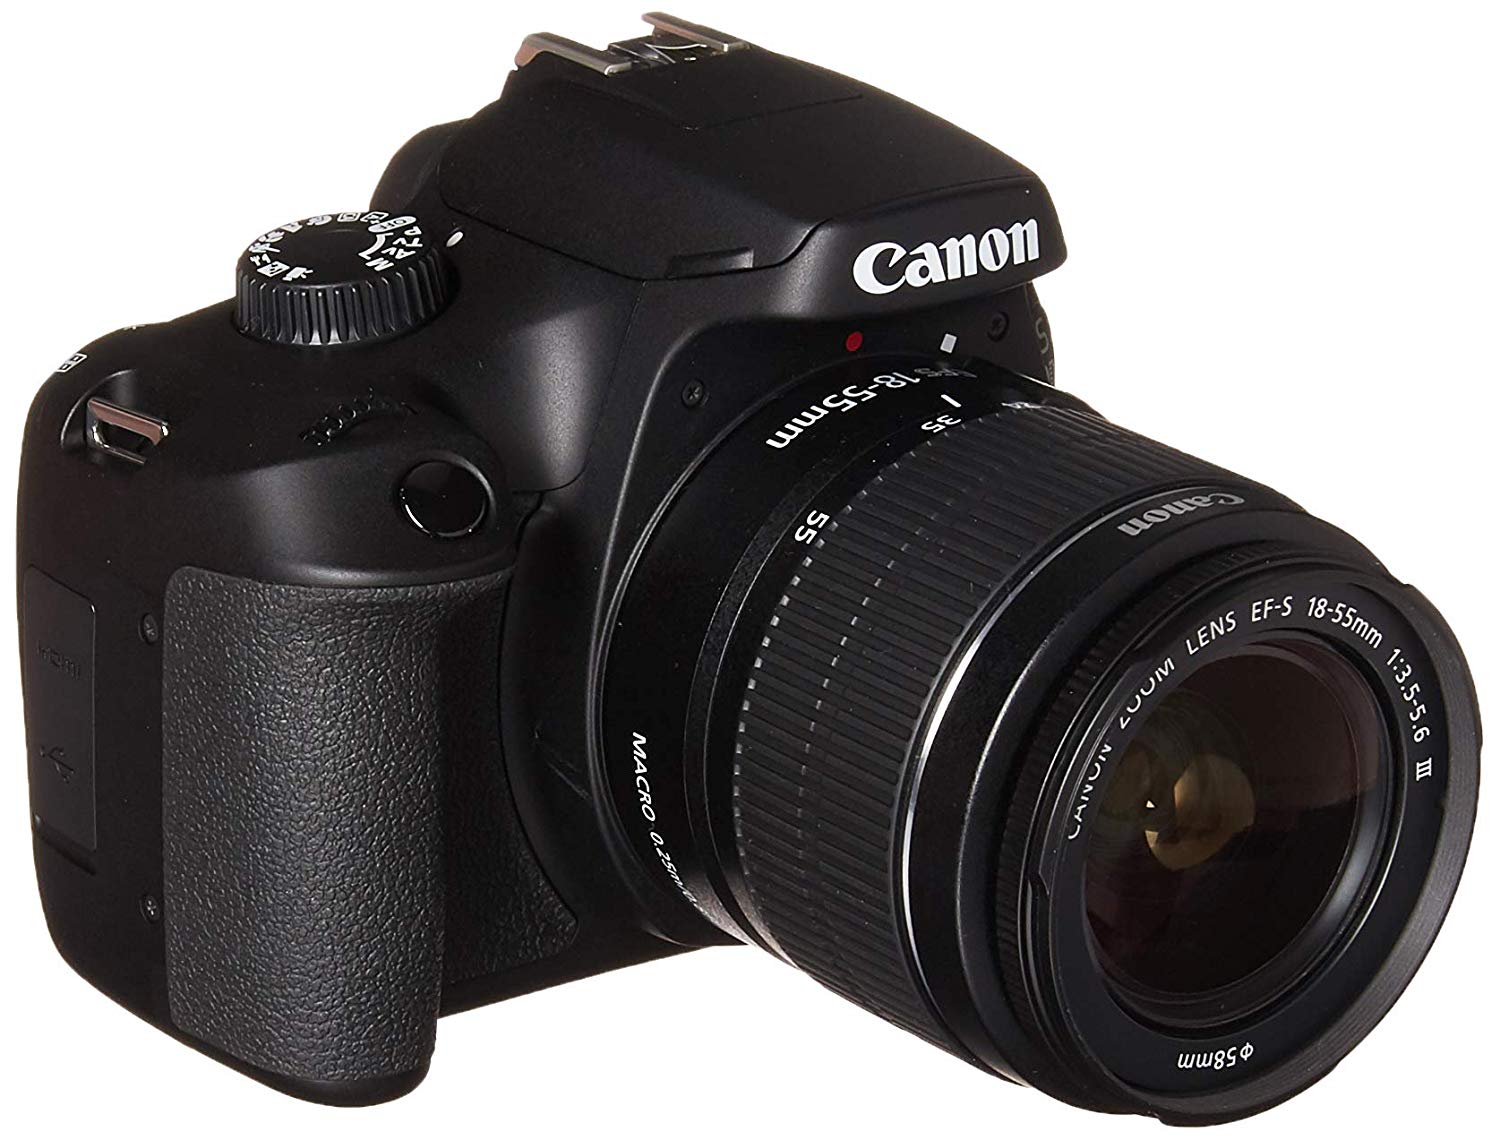 Canon EOS 4000D DSLR Camera EF-S 18-55 mm f/3.5-5.6 III Lens + Buzz-Photo Starter Kit - image 2 of 3